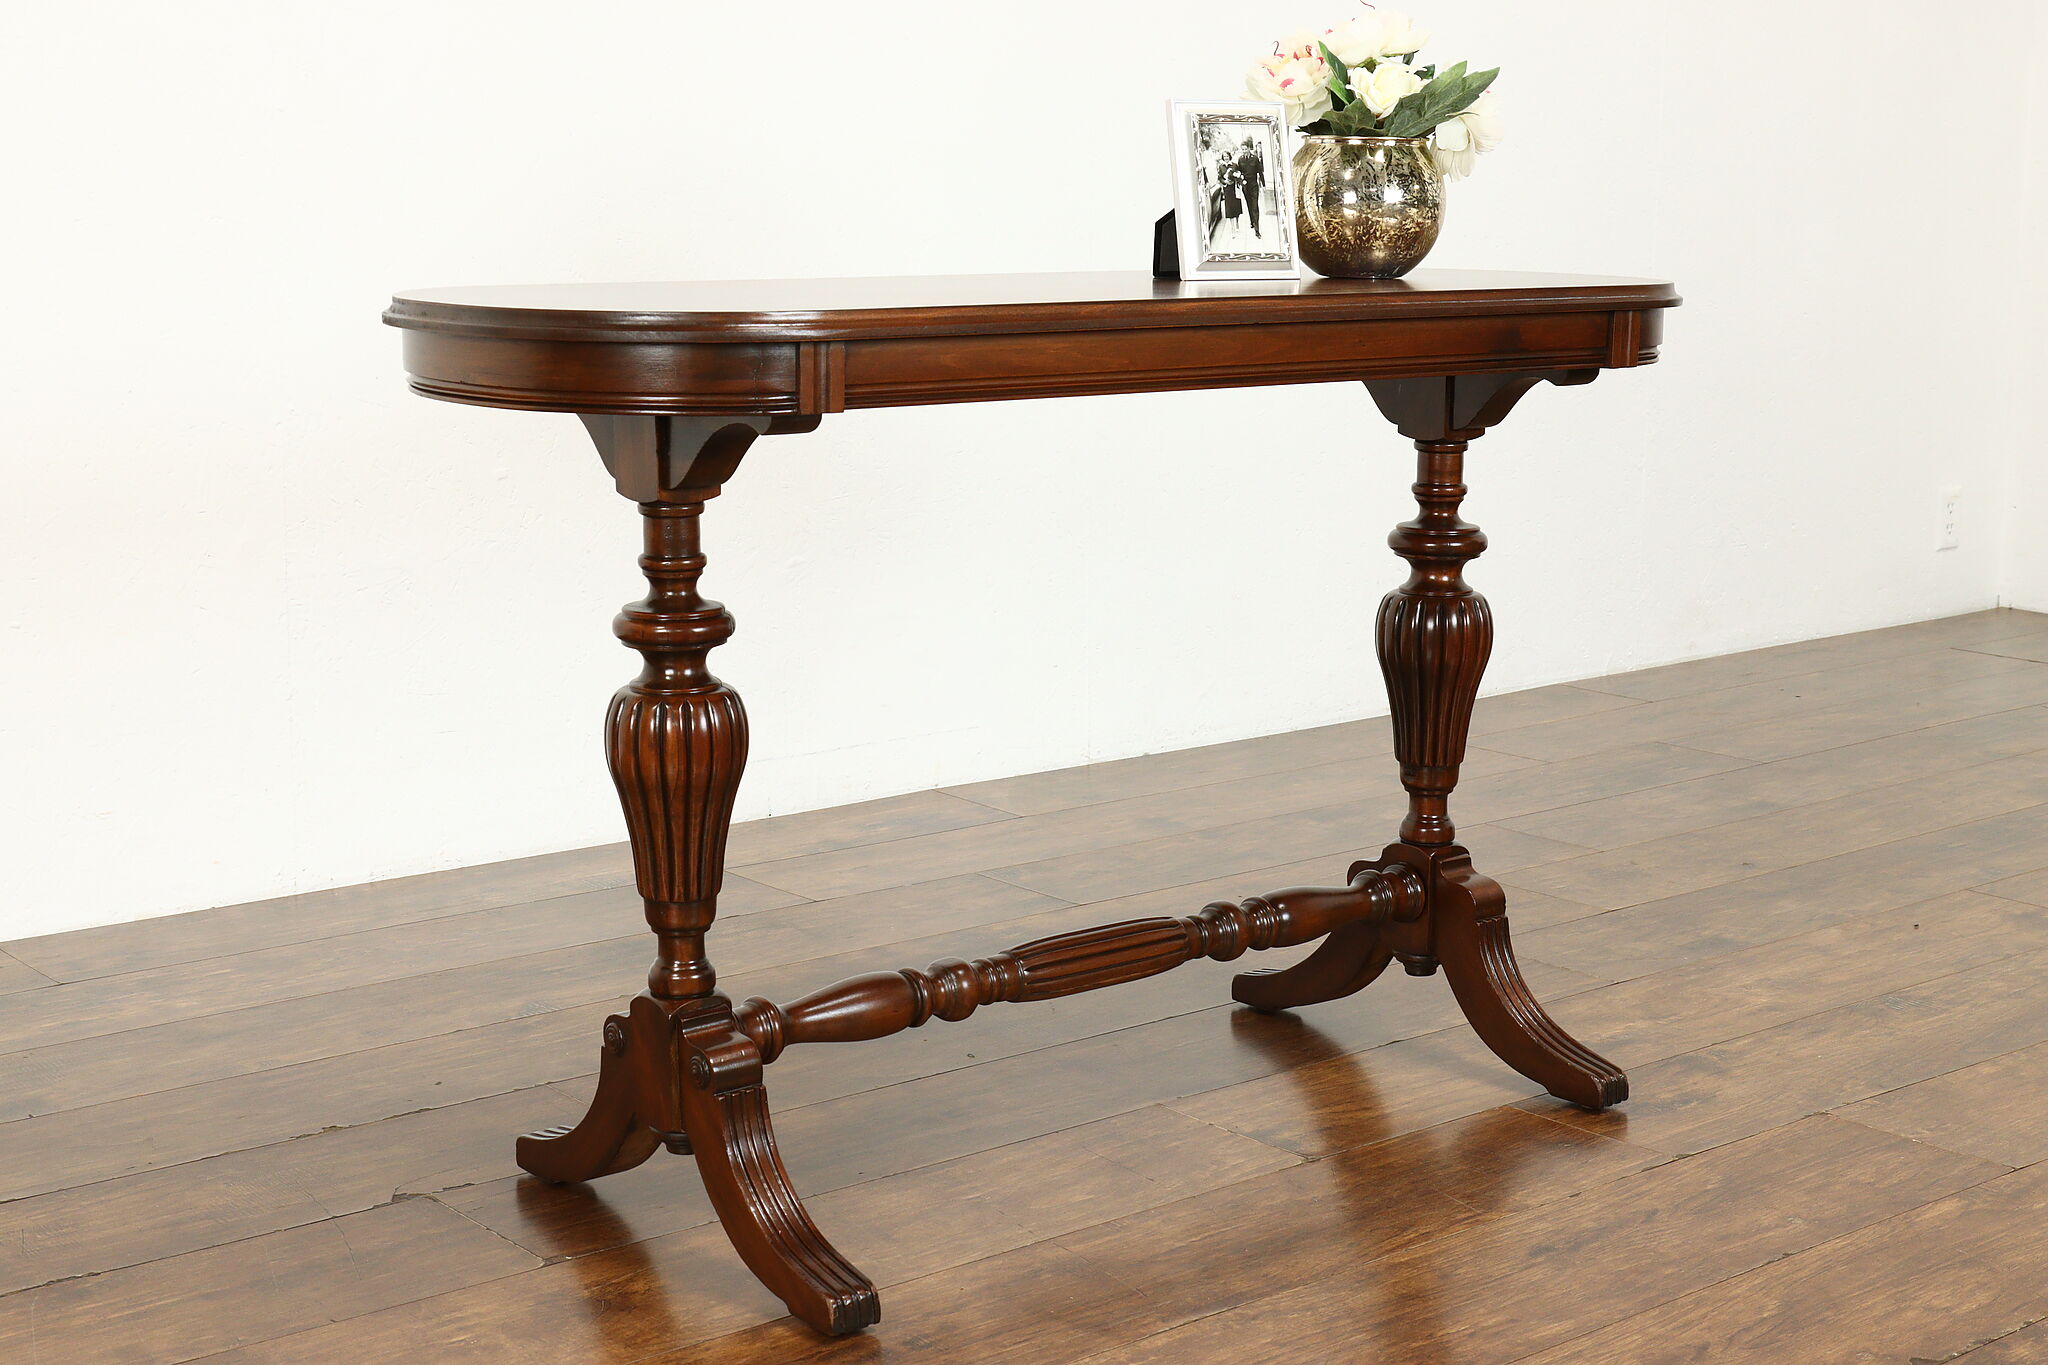 klei Belang Behandeling Traditional Tudor Style Antique Vintage Walnut Hall Console or Sofa Table